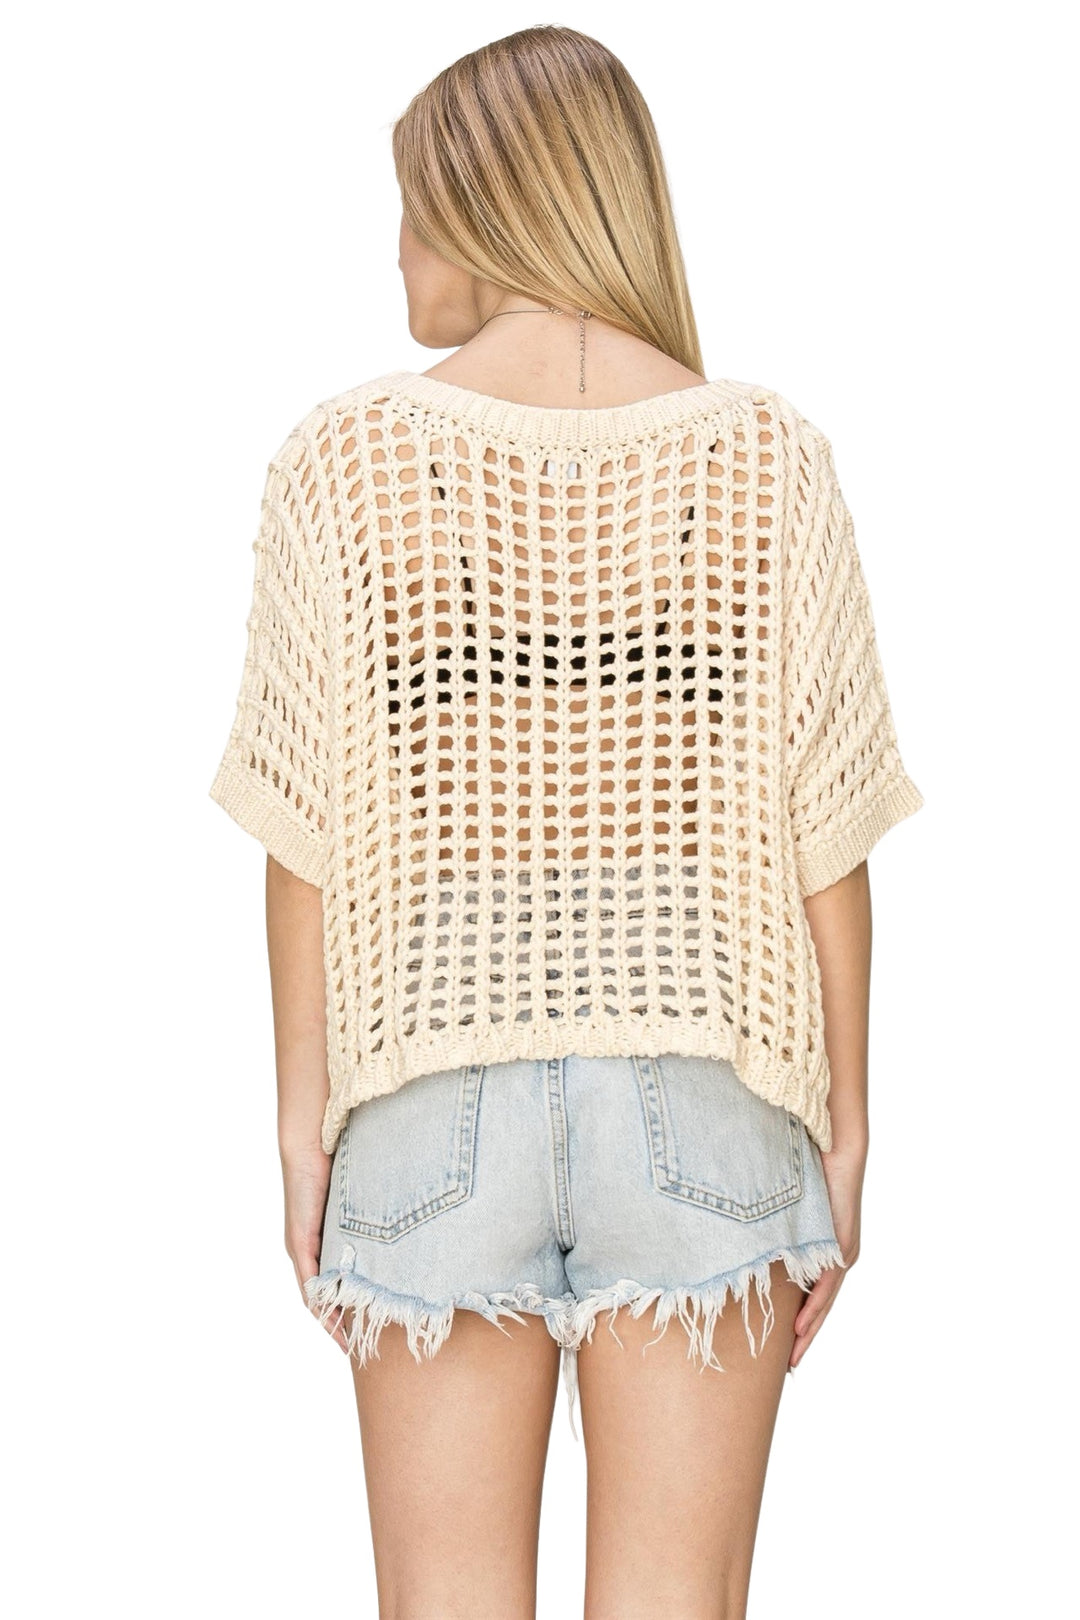 Woven Together Crochet Top in Natural